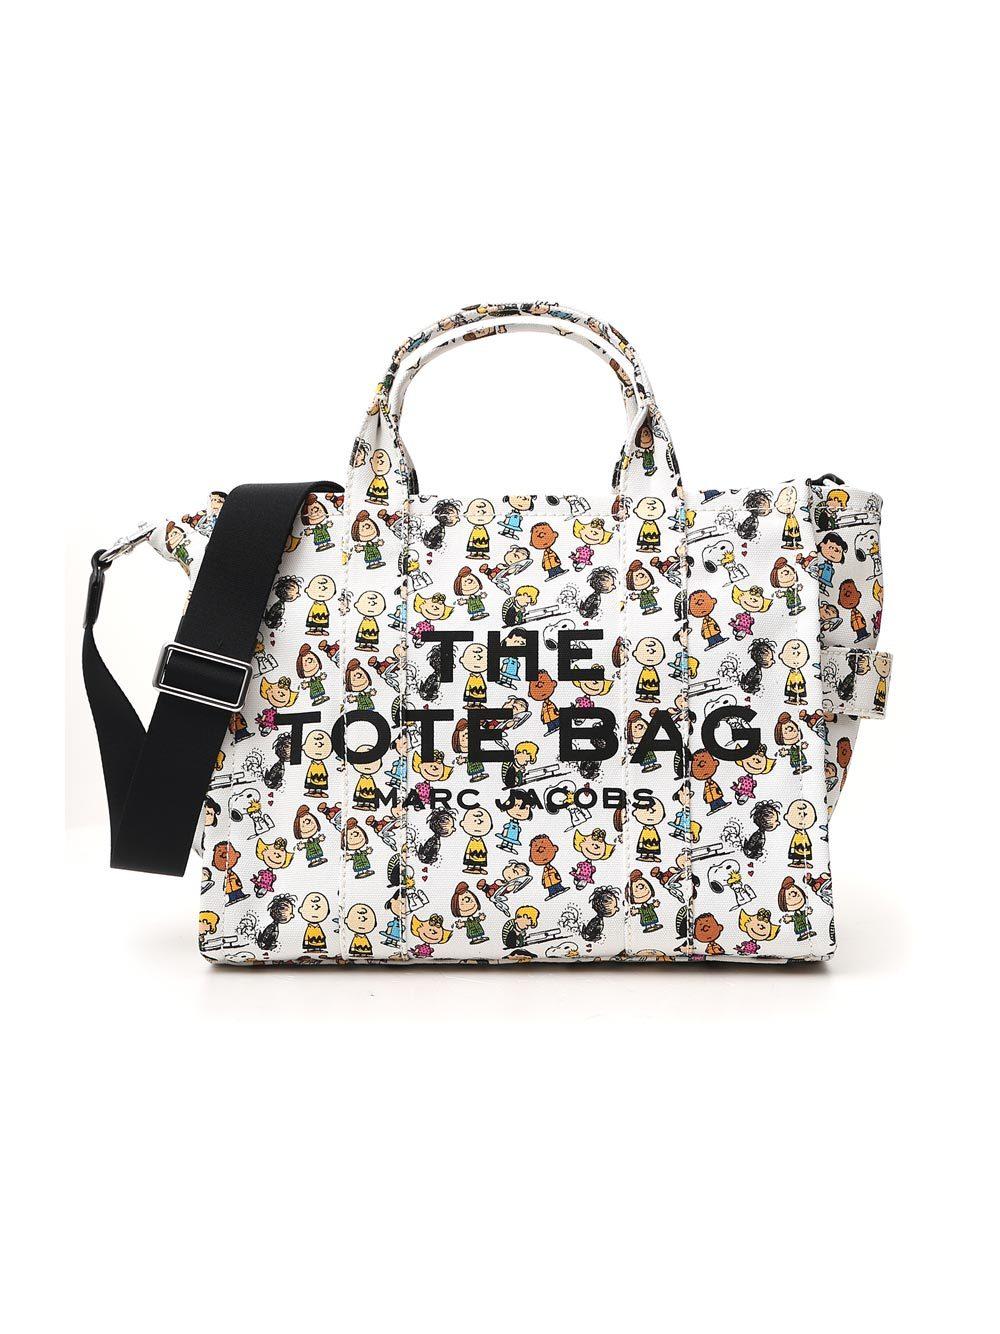 Marc Jacobs X Peanuts The Small Traveler Tote Bag in Black | Lyst